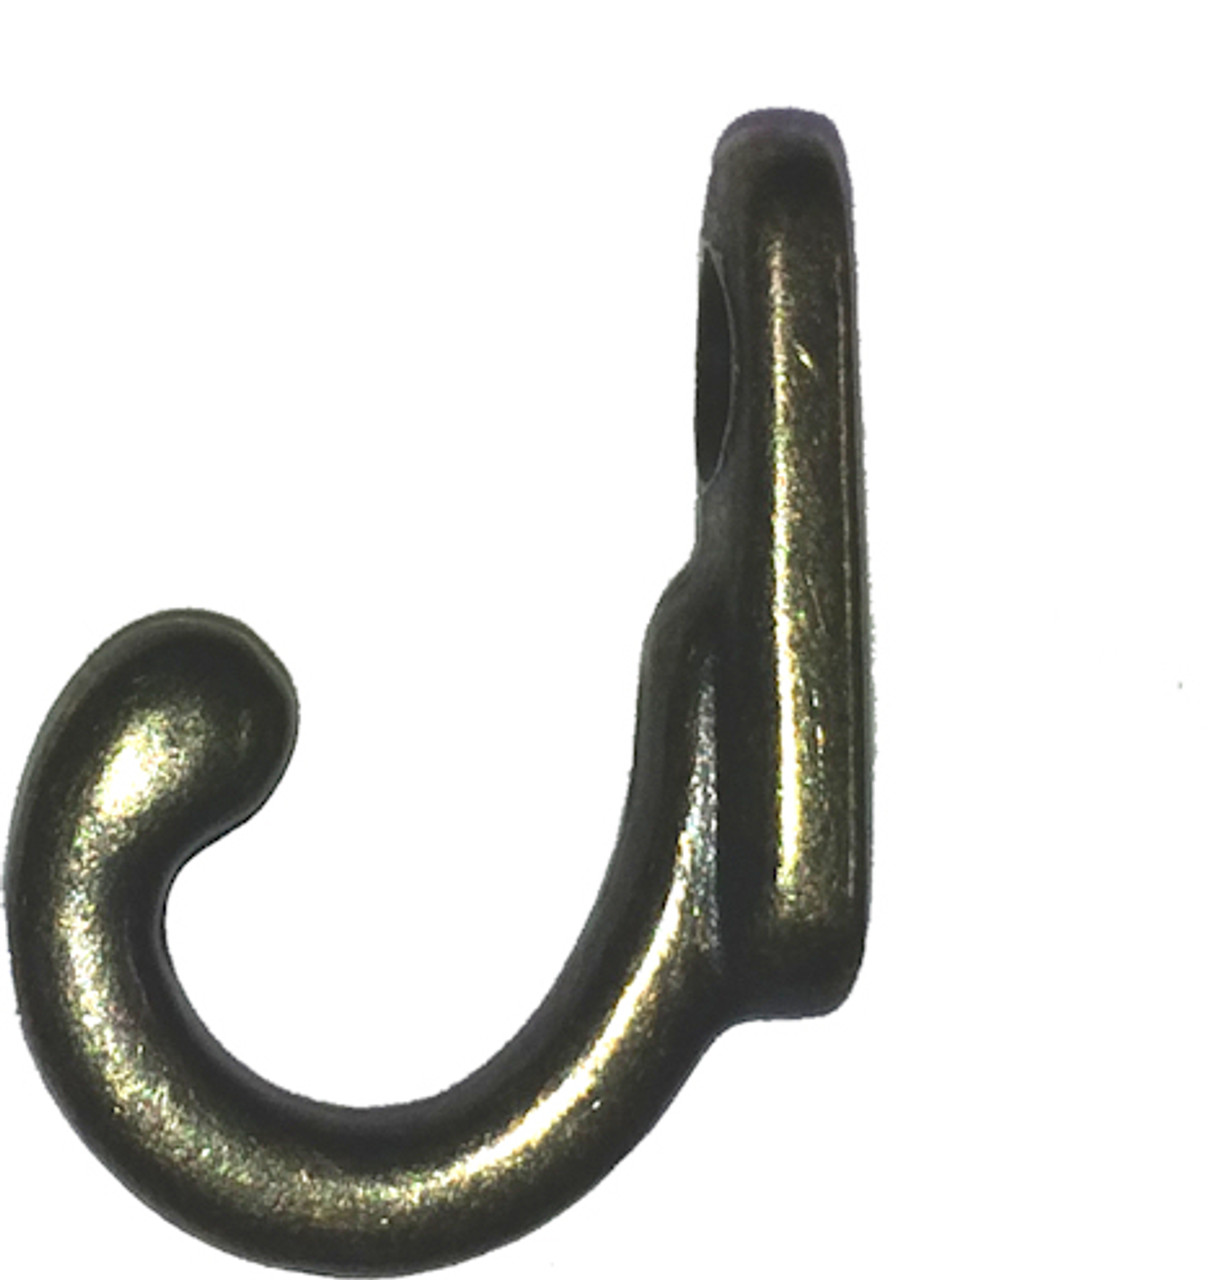 10 Pack) Jewelry Box Hook or Key Hanger with Screw Antique Brass